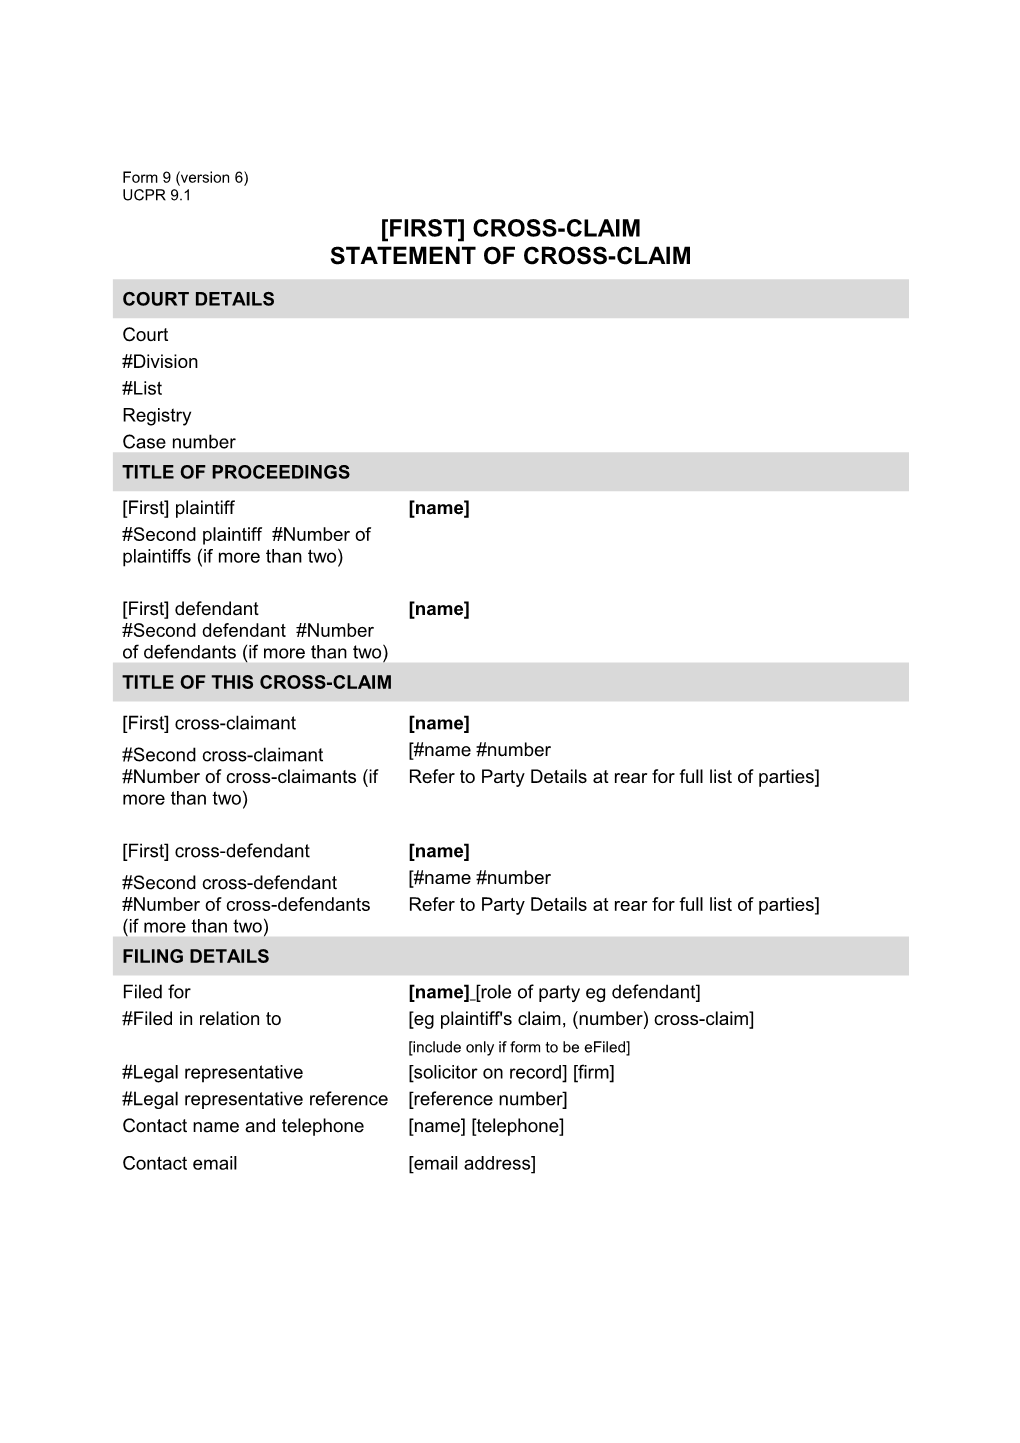 Form 9 - First Cross-Claim Statement of Cross-Claim